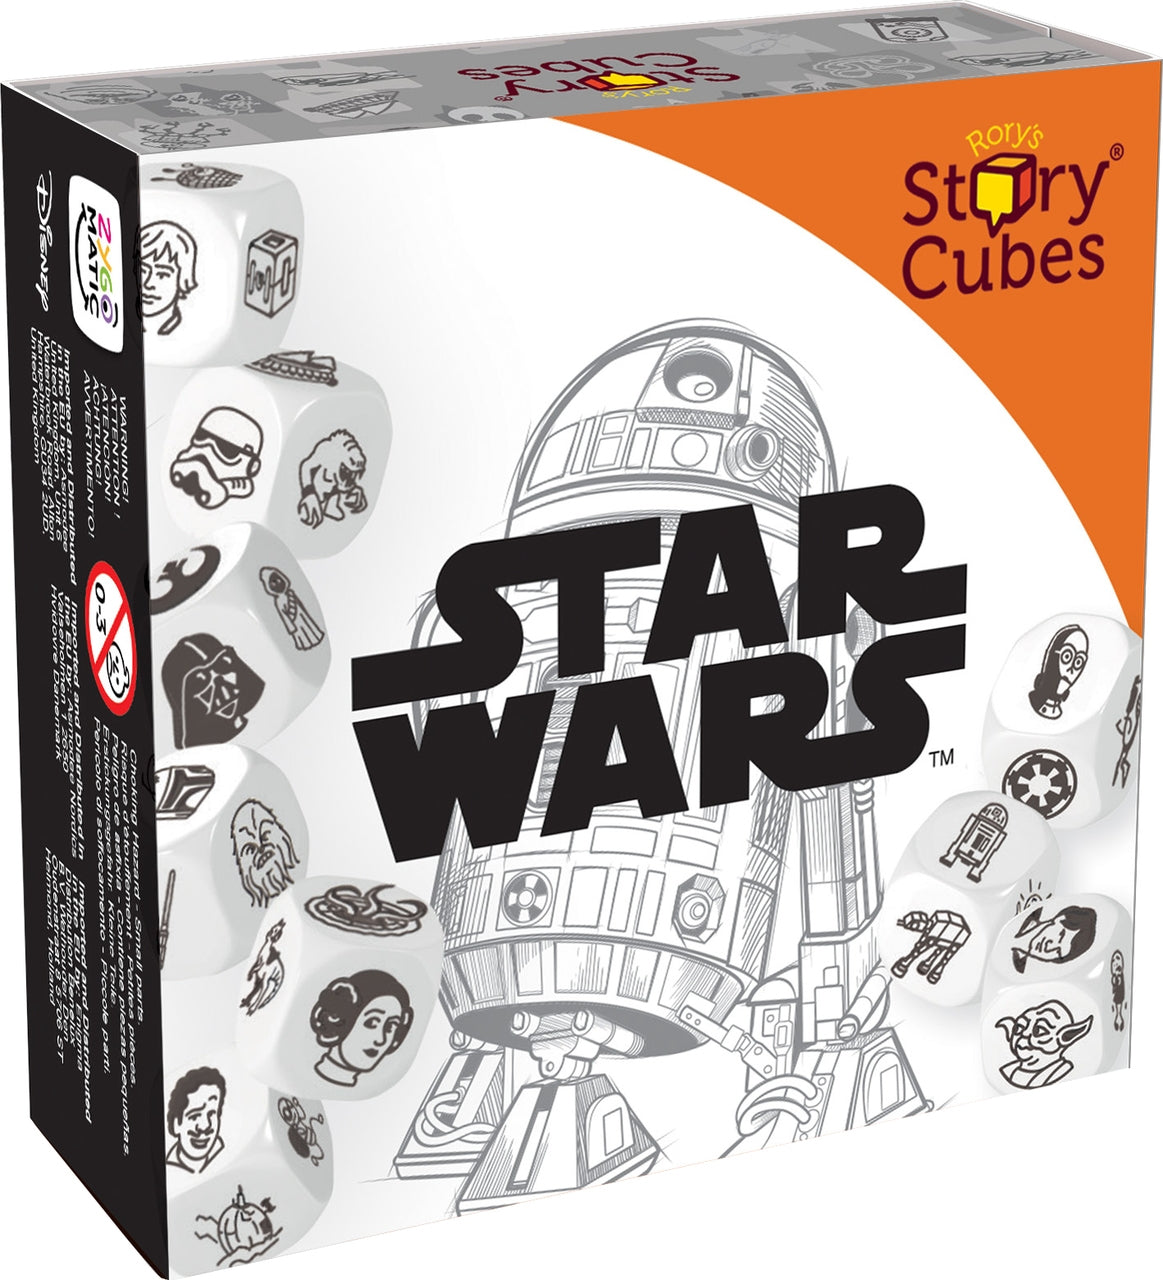 Star Wars - Rorys Story Cubes Box